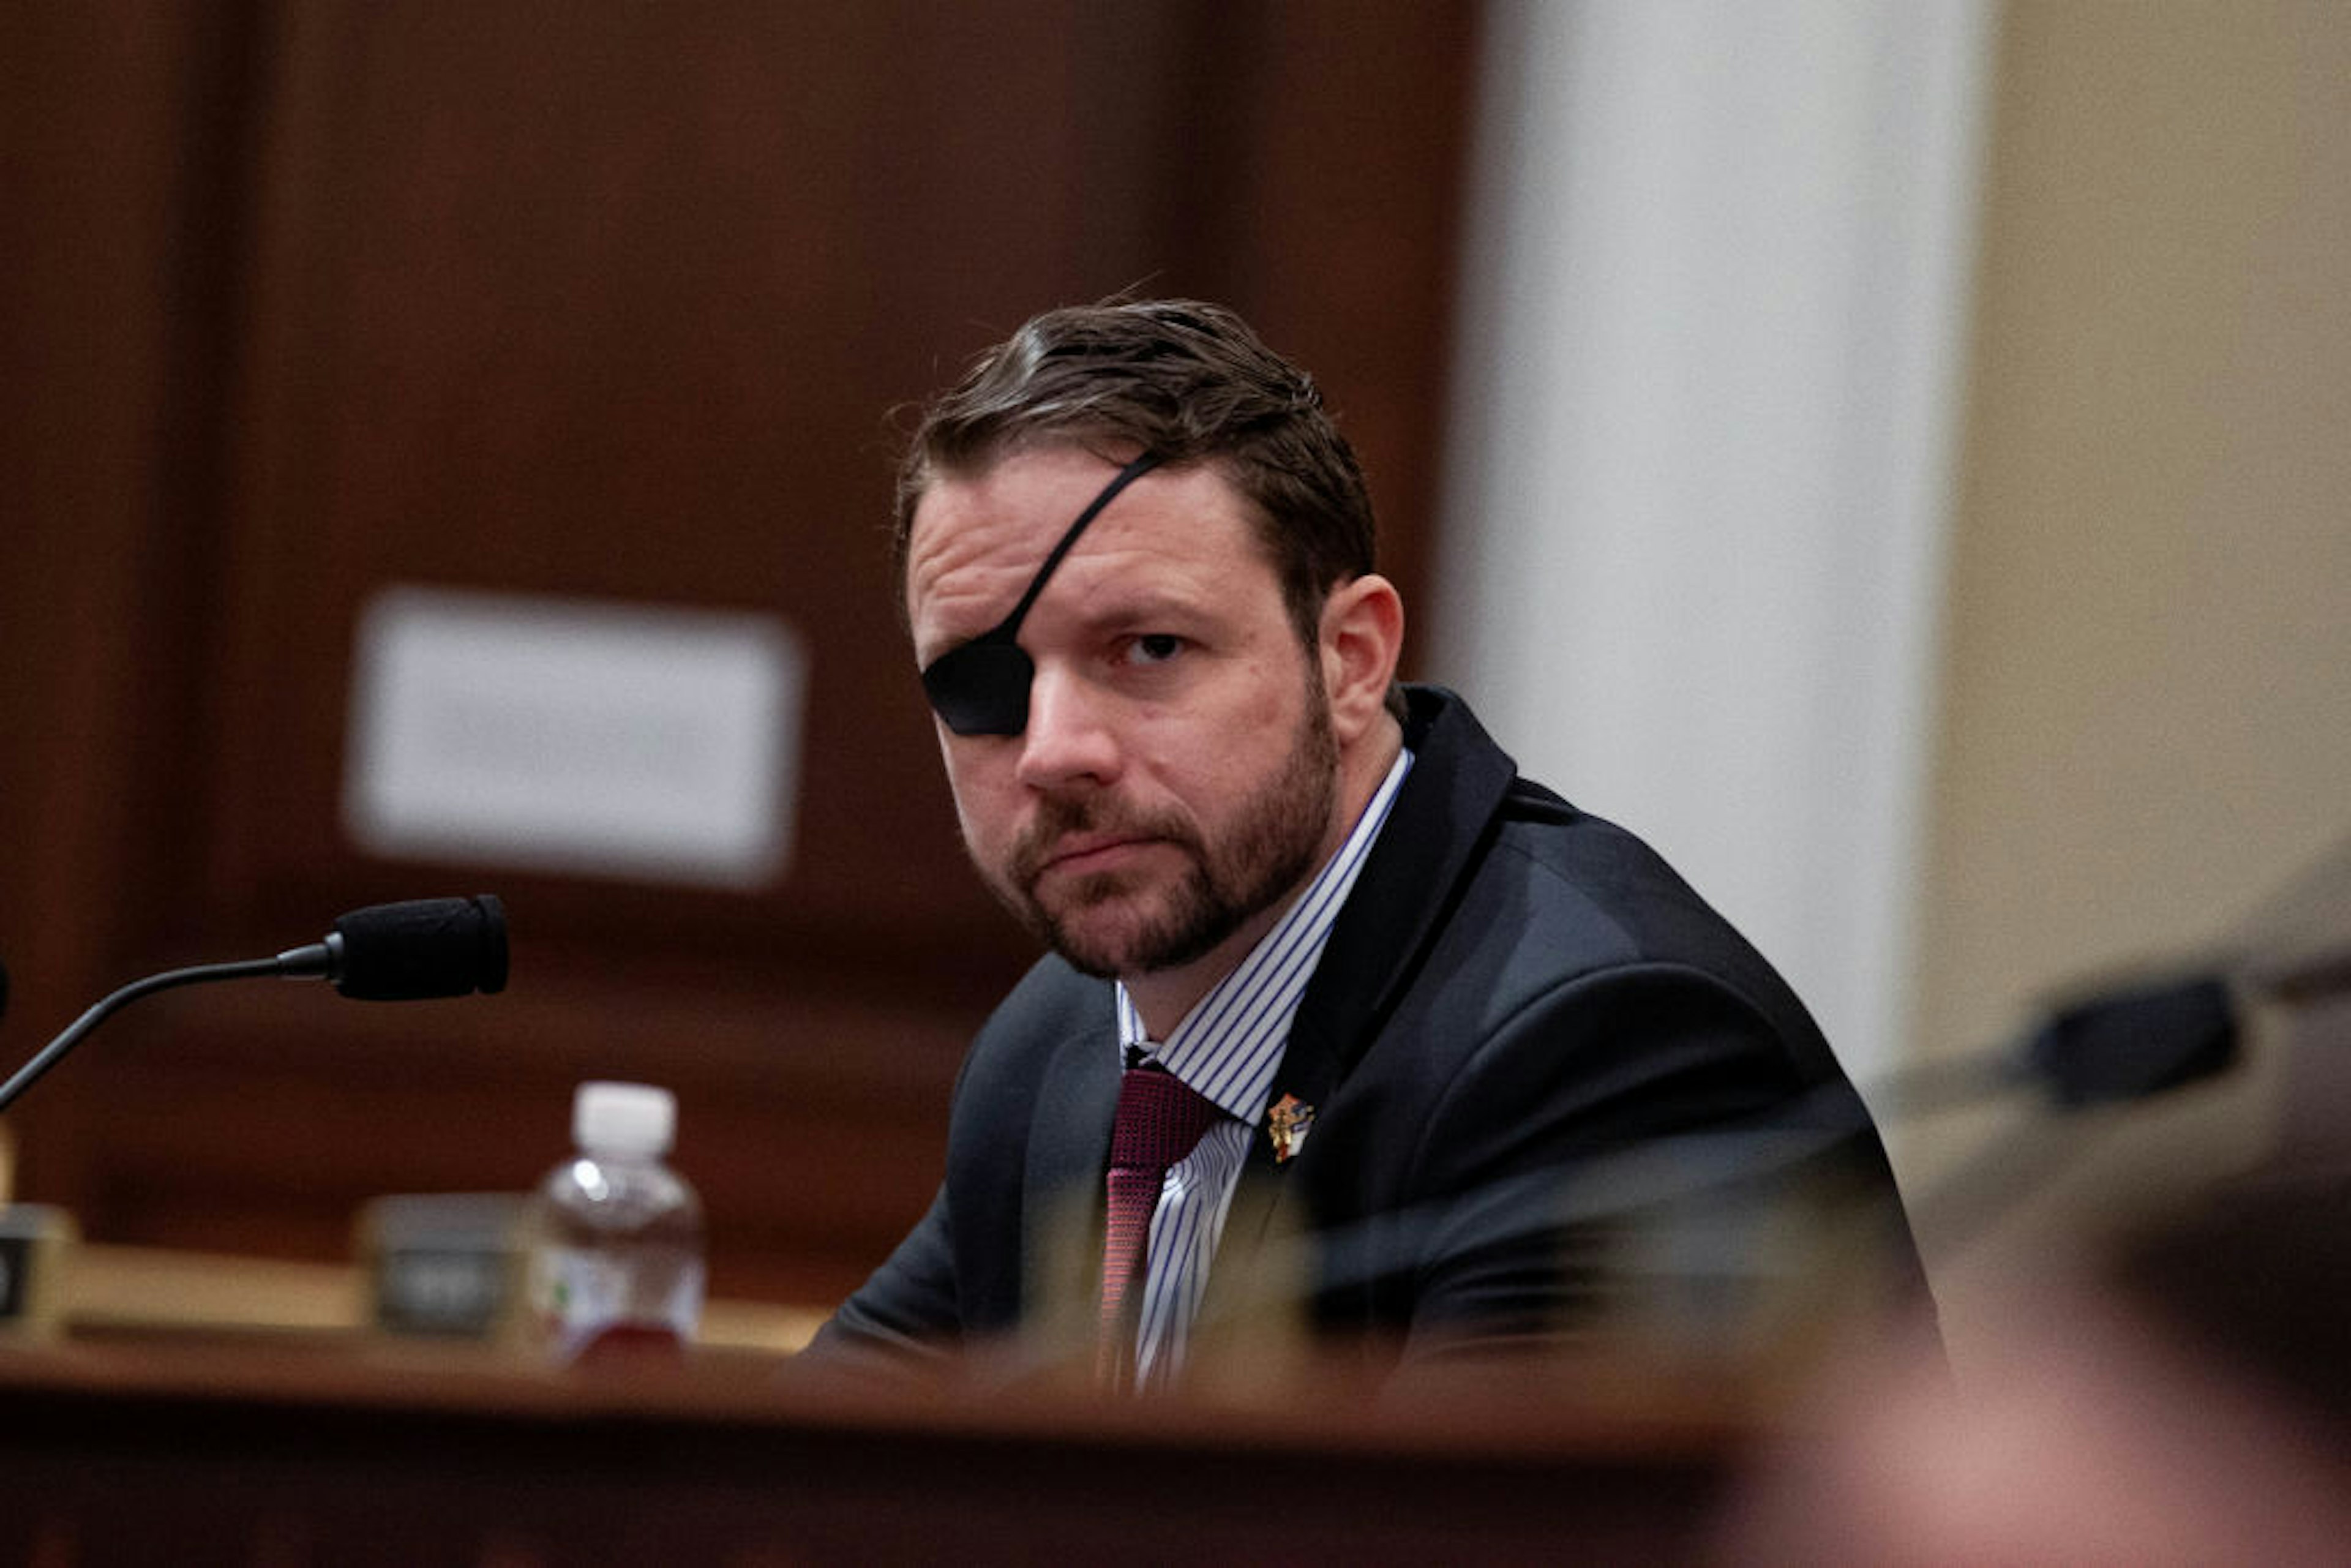 Representative Dan Crenshaw a Republican from Texas, listens during a House Budget Committee hearing with Russell Vought, acting director of the Office of Management and Budget (OMB), not pictured, in Washington, D.C., U.S., on Tuesday, March 12, 2019. President Donald Trump will propose a U.S. budget that wouldn't balance for 15 years, even assuming stronger economic growth than private forecasters expect and with deep domestic spending cuts that have little chance of passing Congress. Vought said in a statement the proposal "embodies fiscal responsibility" and "shows that we can return to fiscal sanity without halting our economic resurgence." Photographer: Anna Moneymaker/Bloomberg via Getty Images